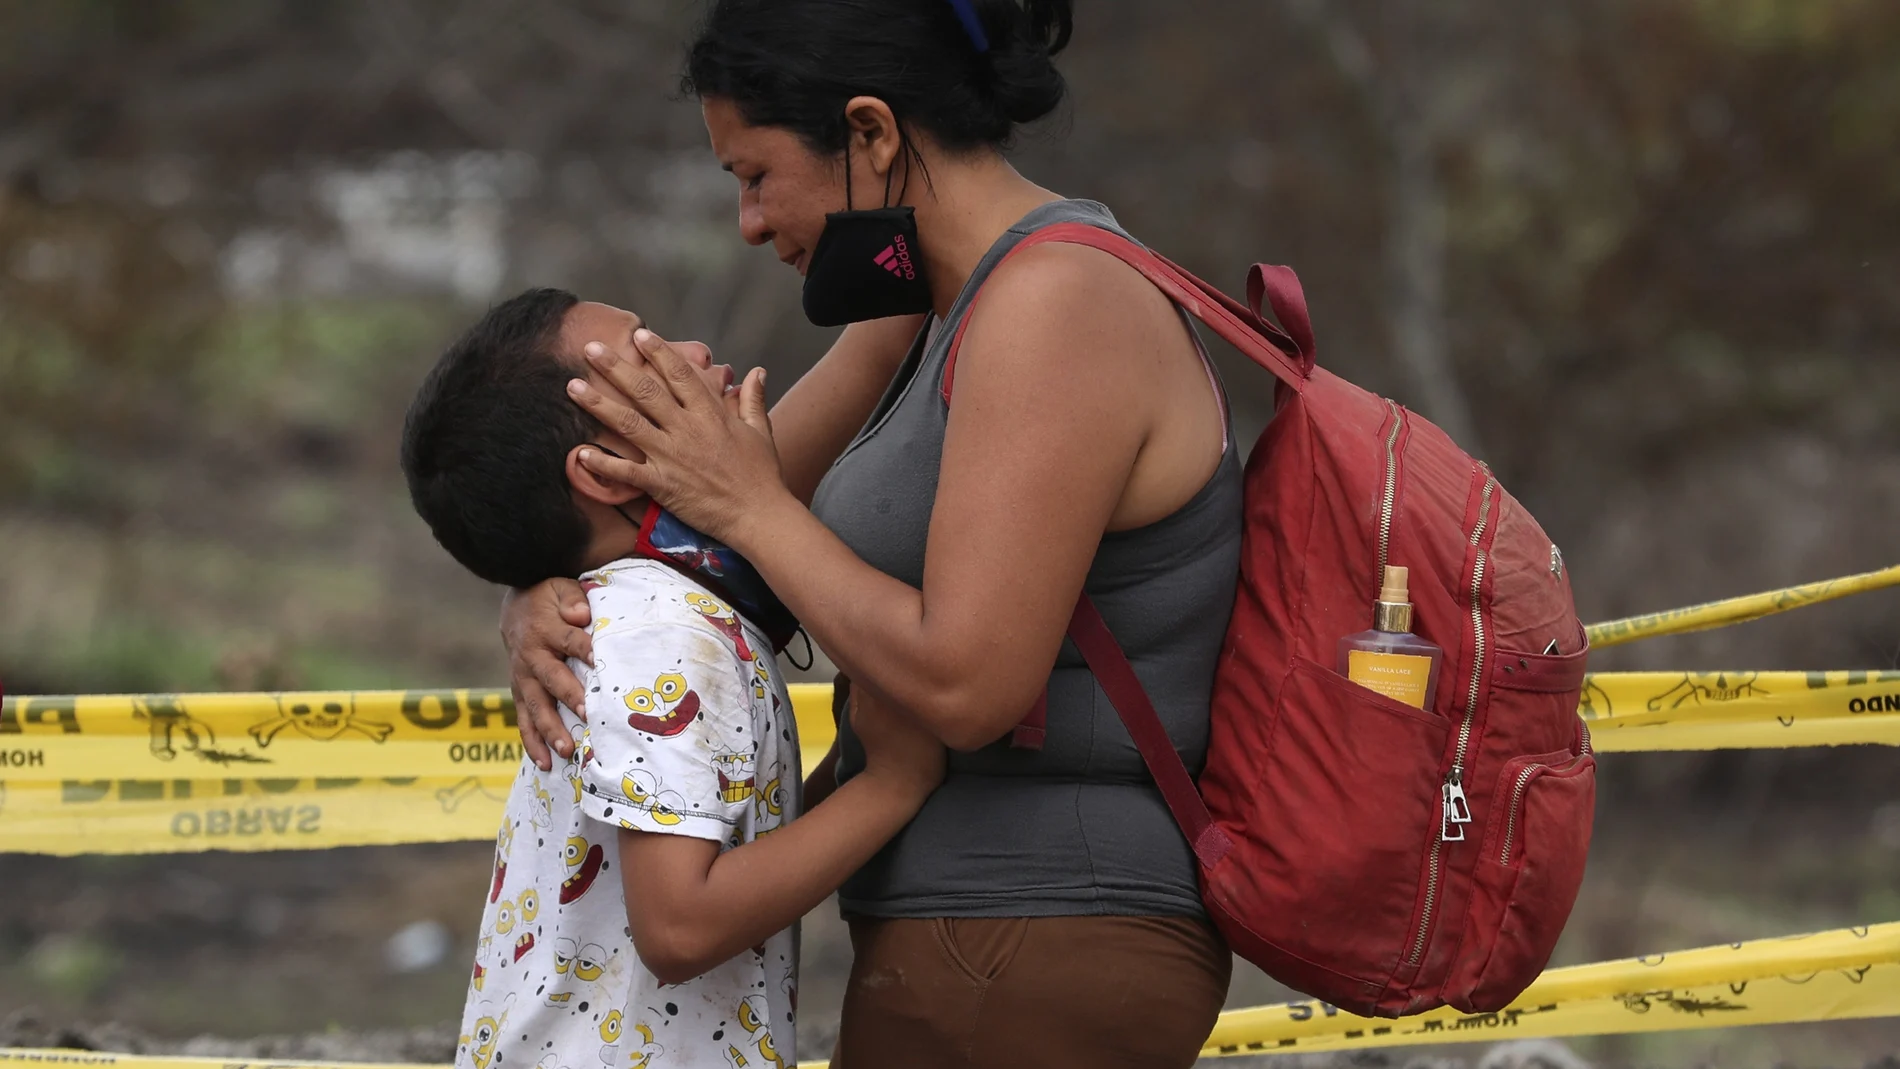 Venezuelan migrant Edi Briceno comforts her son Erick at a checkpoint before they are returned to Ecuador, in Tumbes, Peru, Friday, Jan. 29, 2021. Peru has sent soldiers to patrol the porous border to stop the illegal influx of Venezuelan migrants. While Peru doesnâ€™t share a border with Venezuela, many migrants try to reach it by going through Ecuador or Colombia. (AP Photo/Martin Mejia)